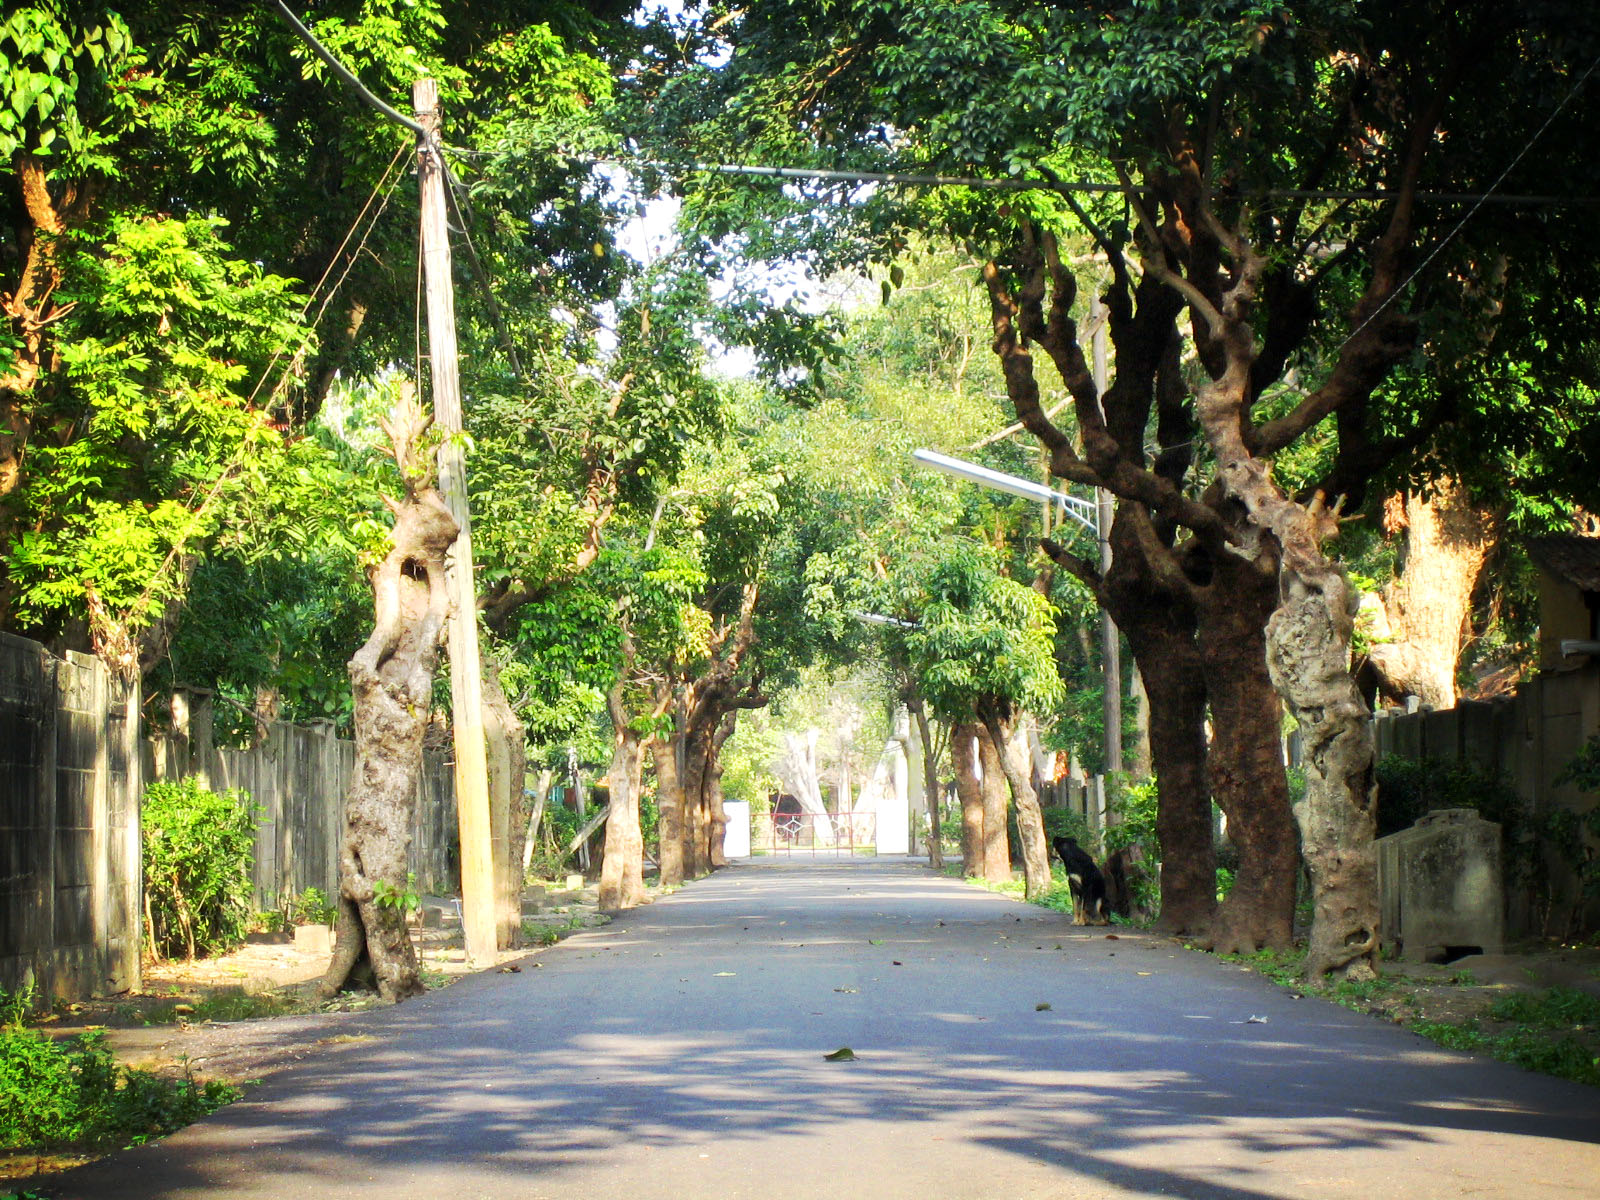 a street view showing the trees lining the road